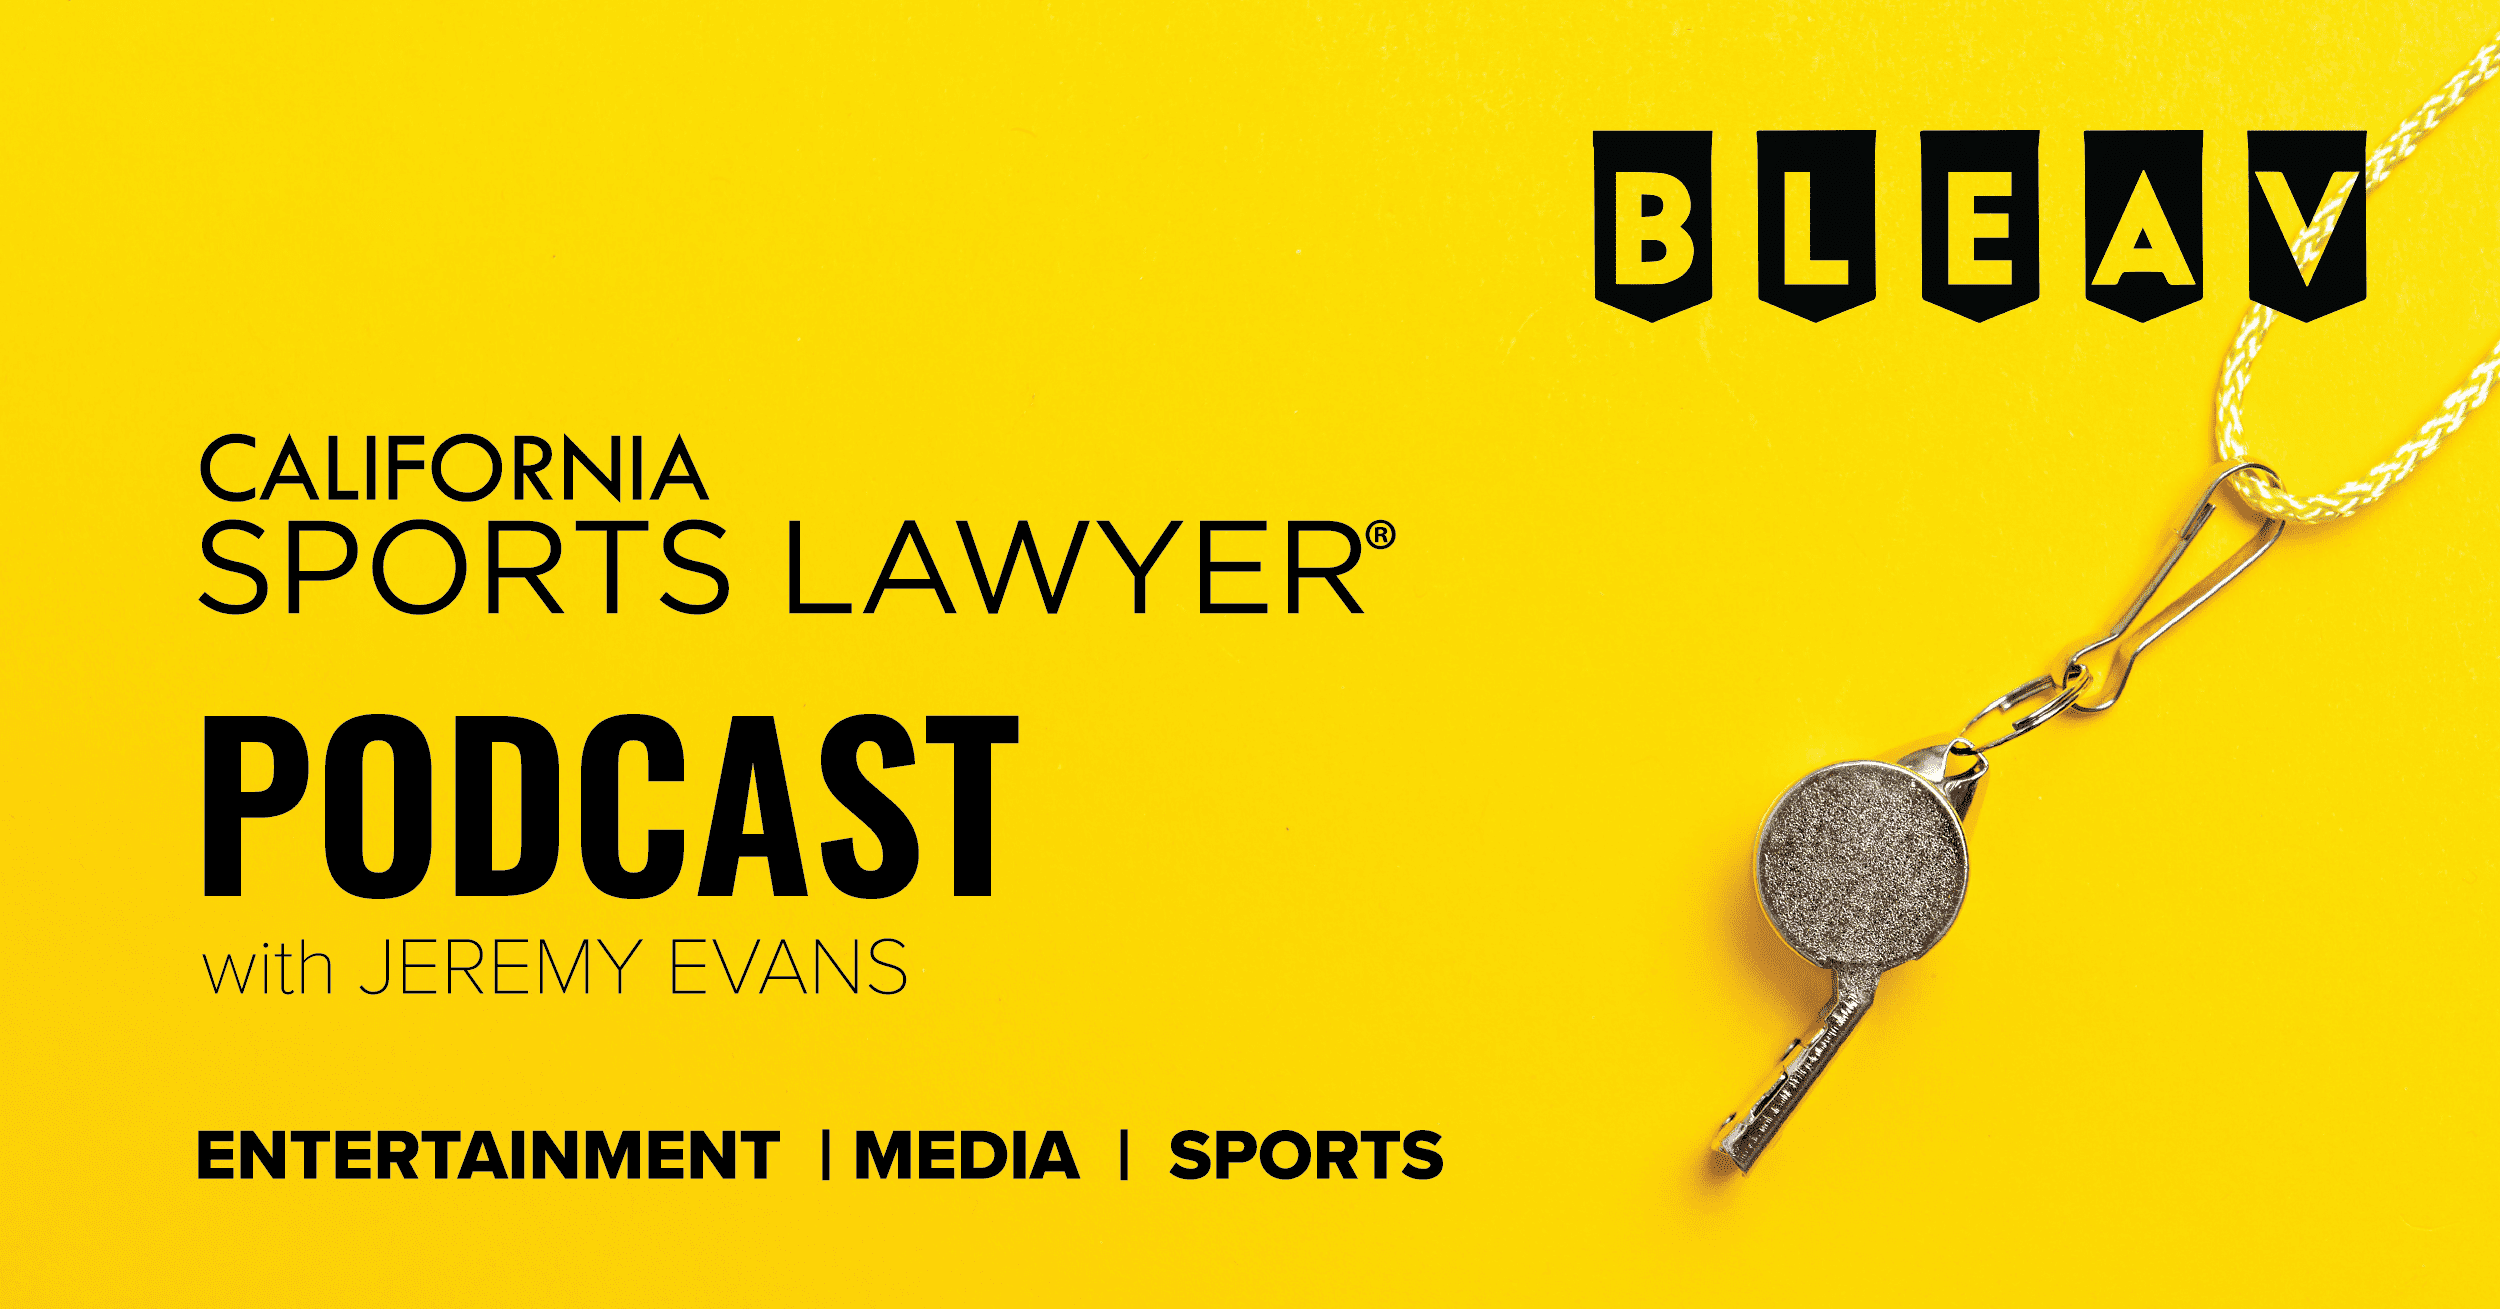 California Sports Lawyer® Podcast with Jeremy Evans: The NFL is Using Entertainment and Music to Gain Viewers